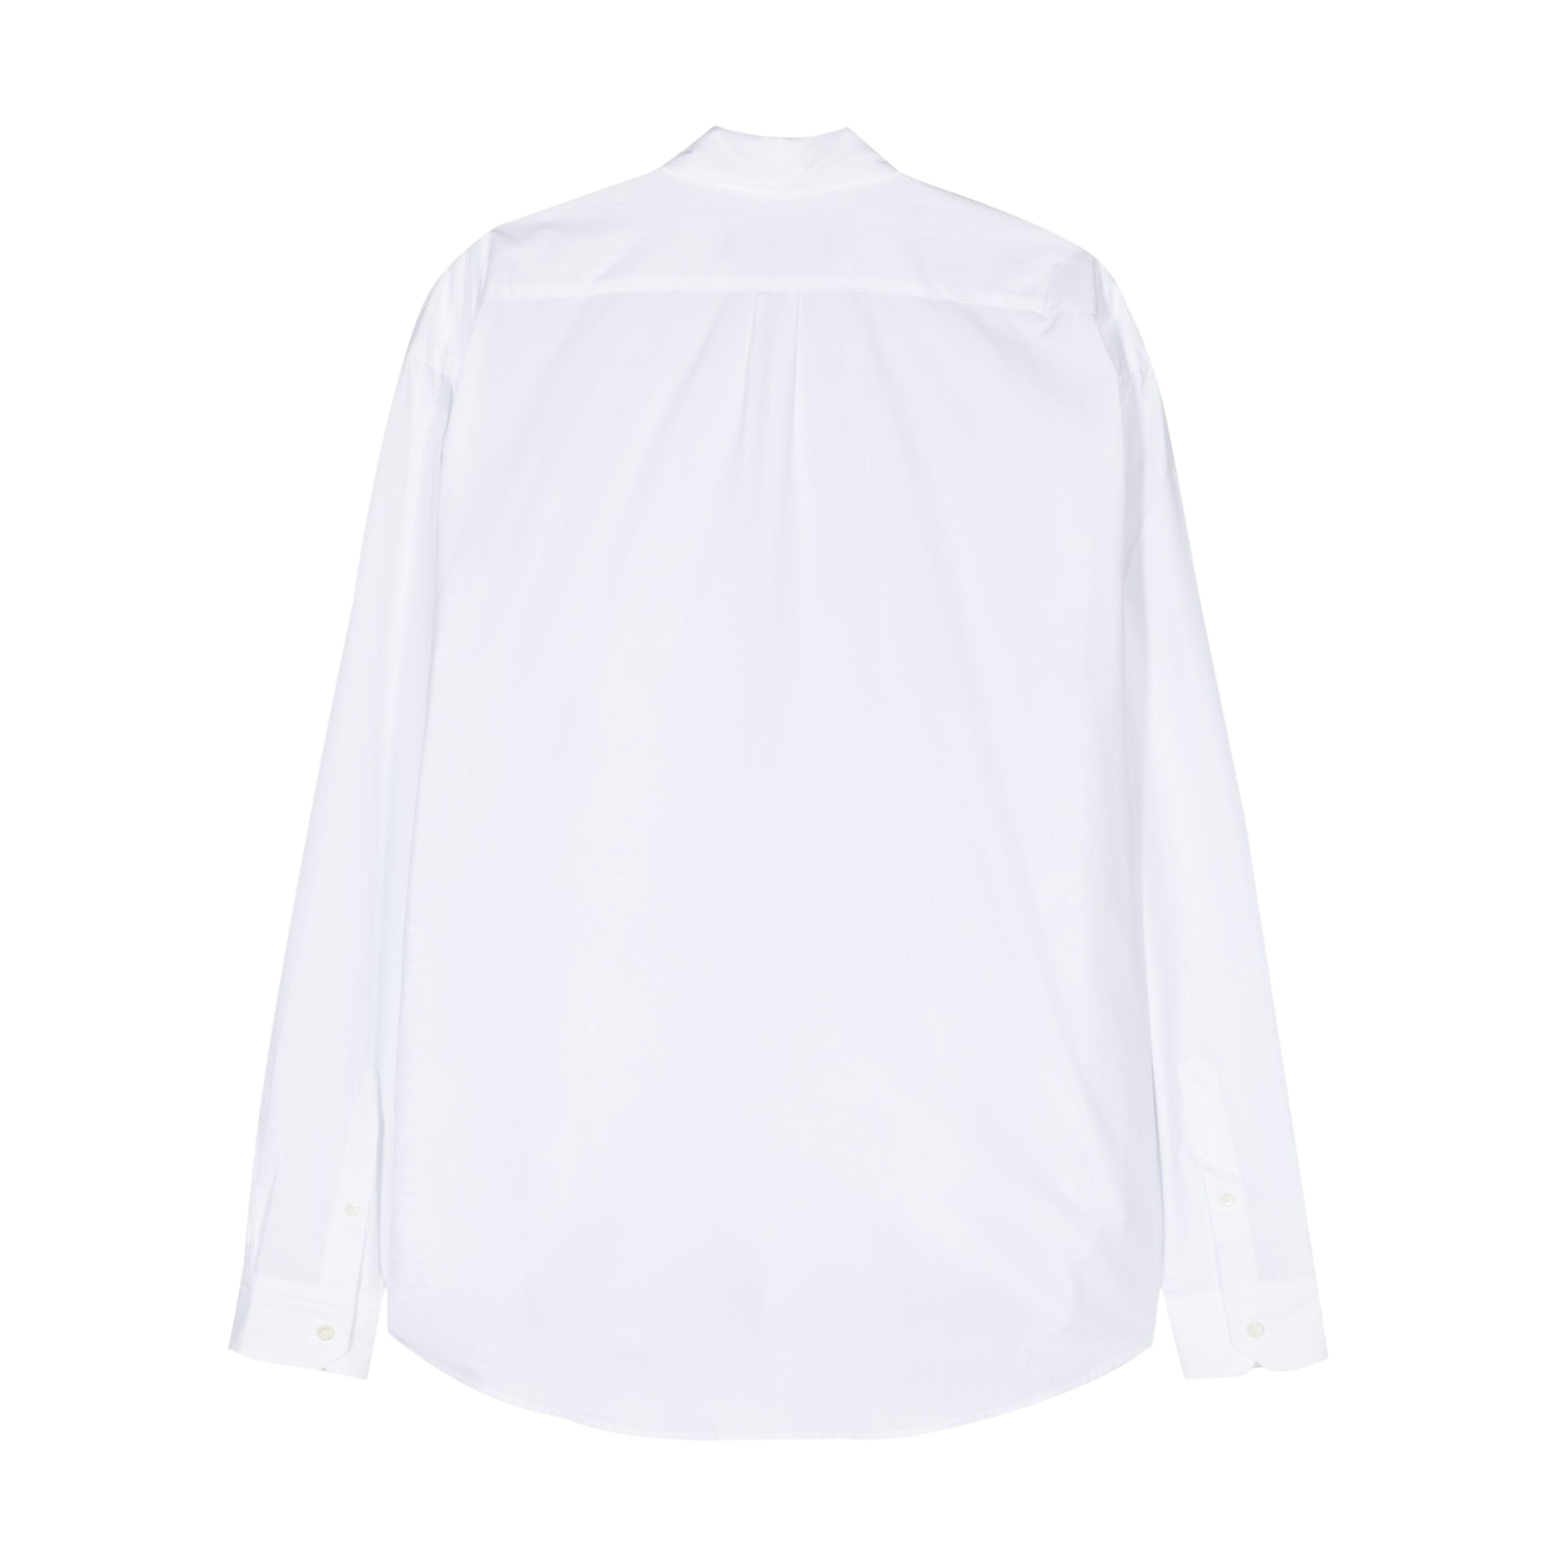 Y/PROJECT SCRUNCHED SHIRT Shirts White